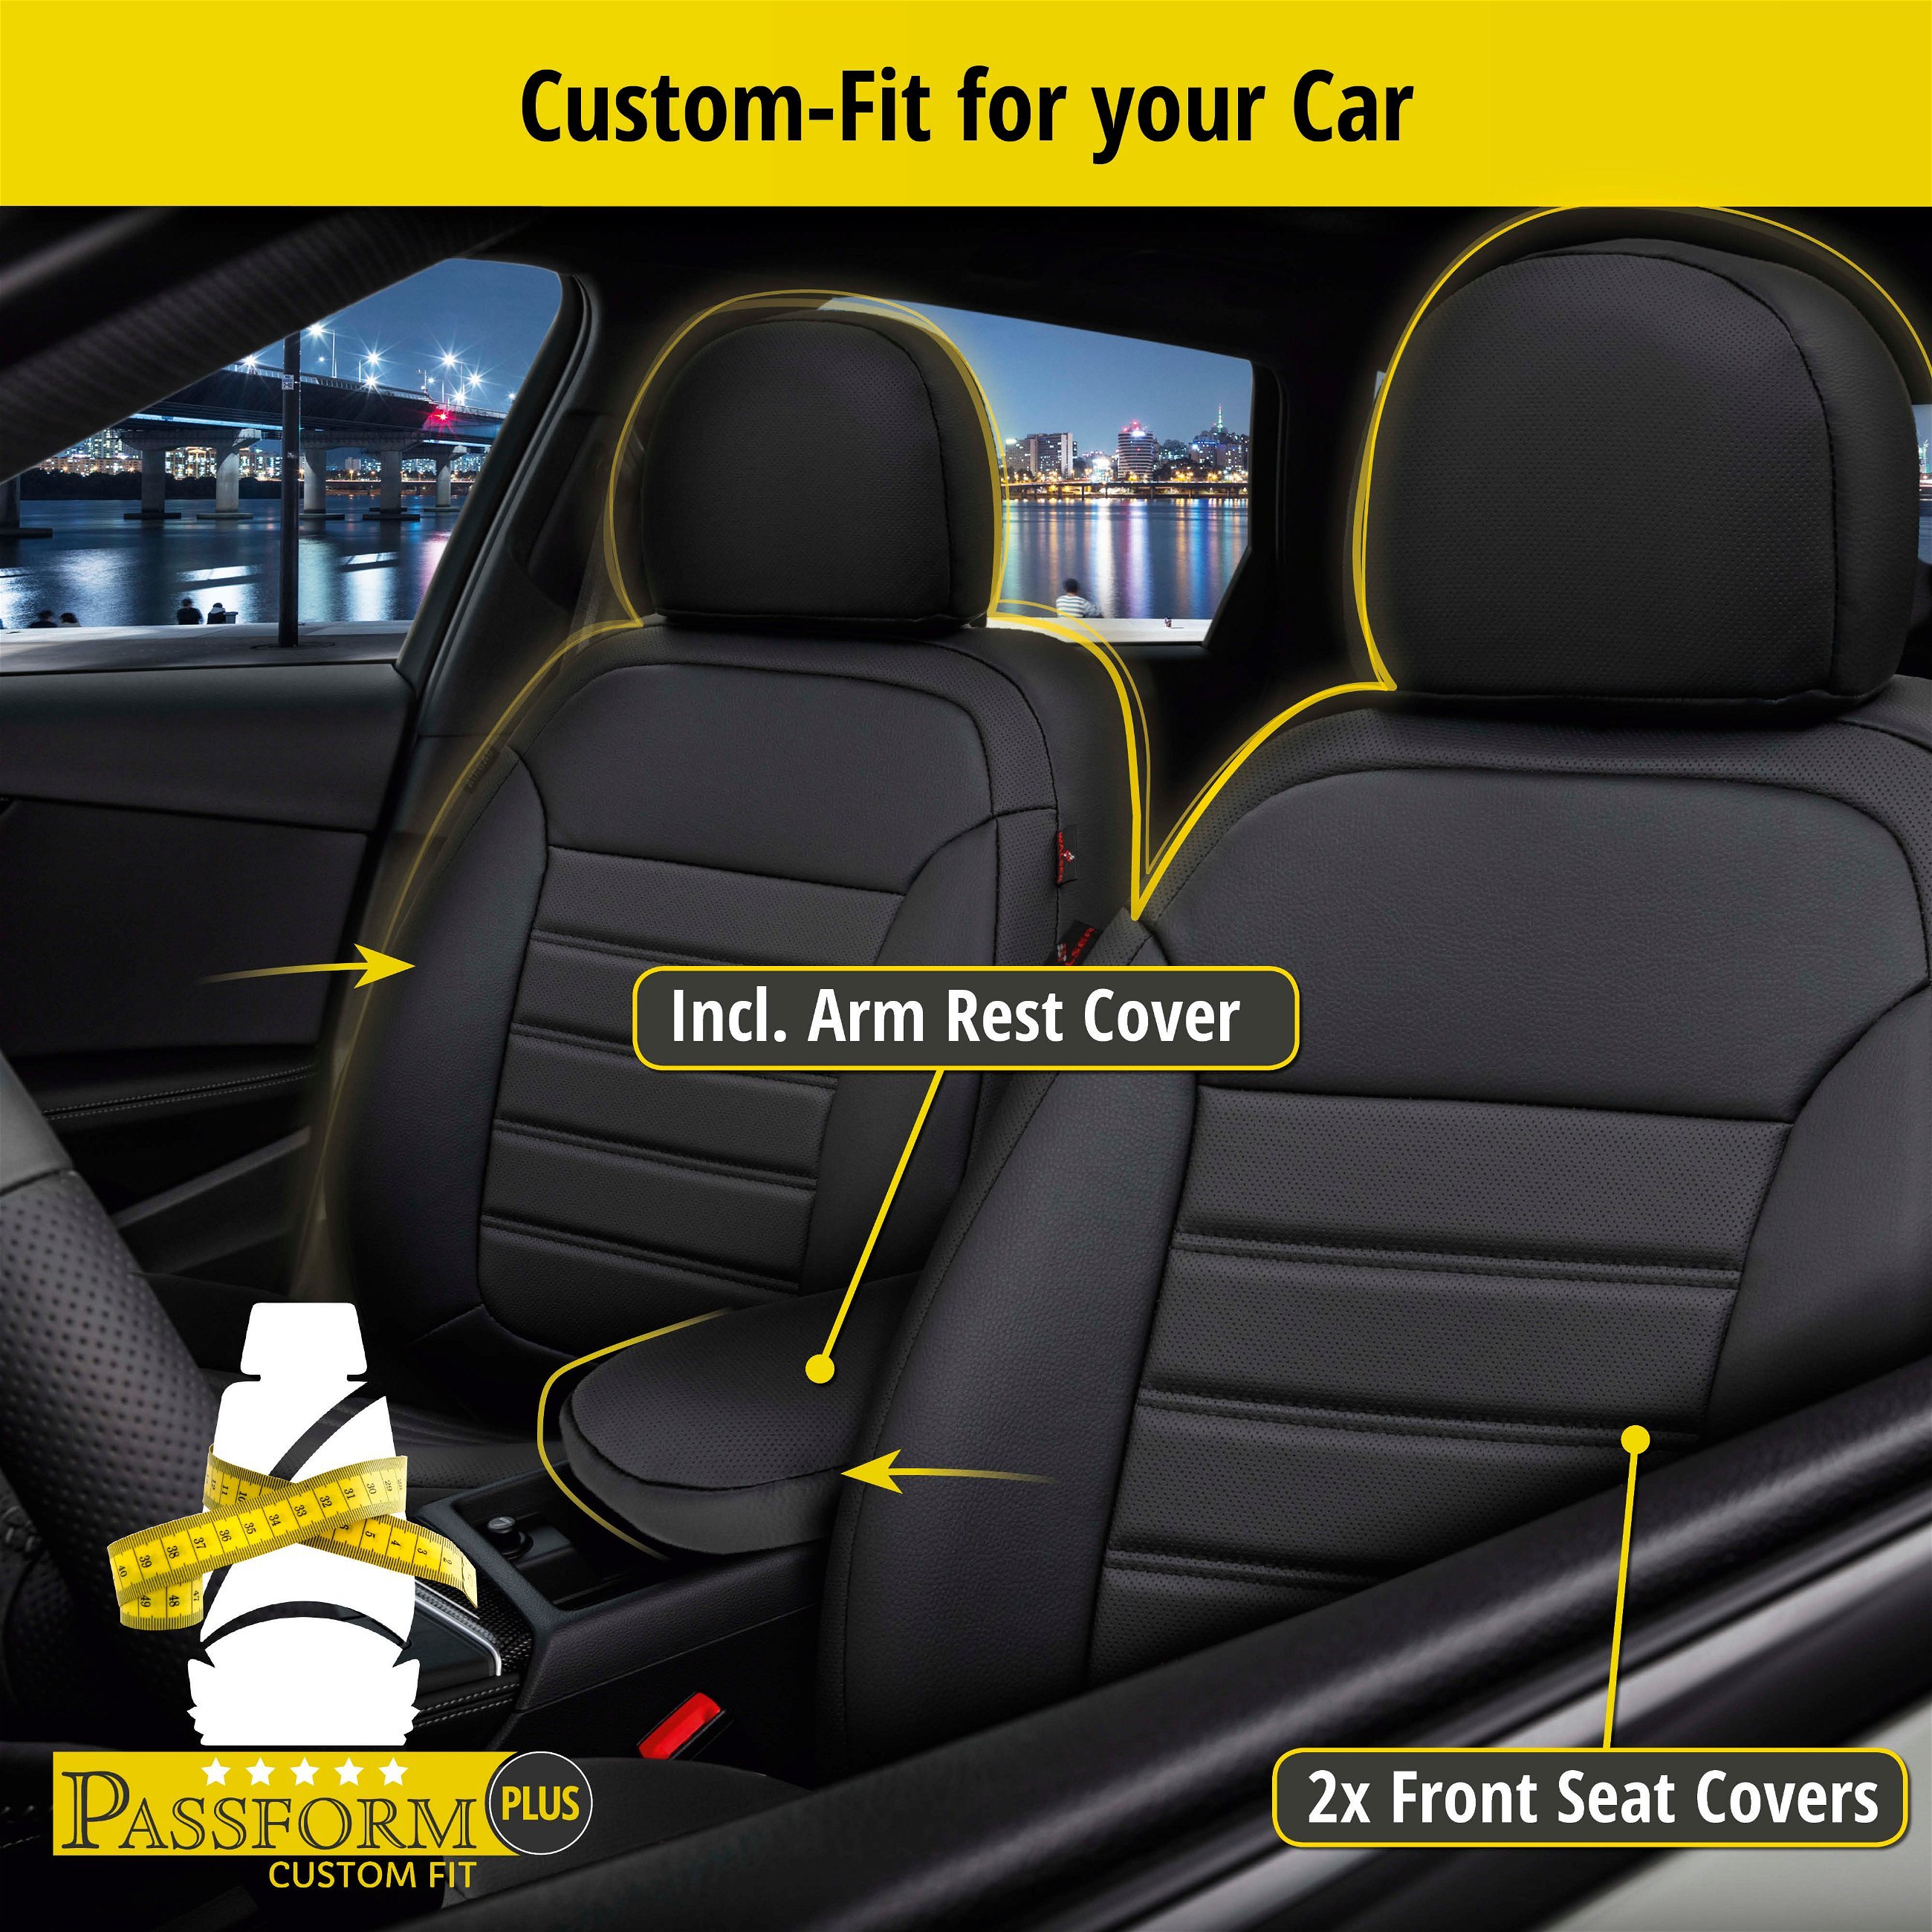 Seat Cover Robusto for VW Golf V (1K1) 10/2003-07/2010, 2 seat covers for normal seats